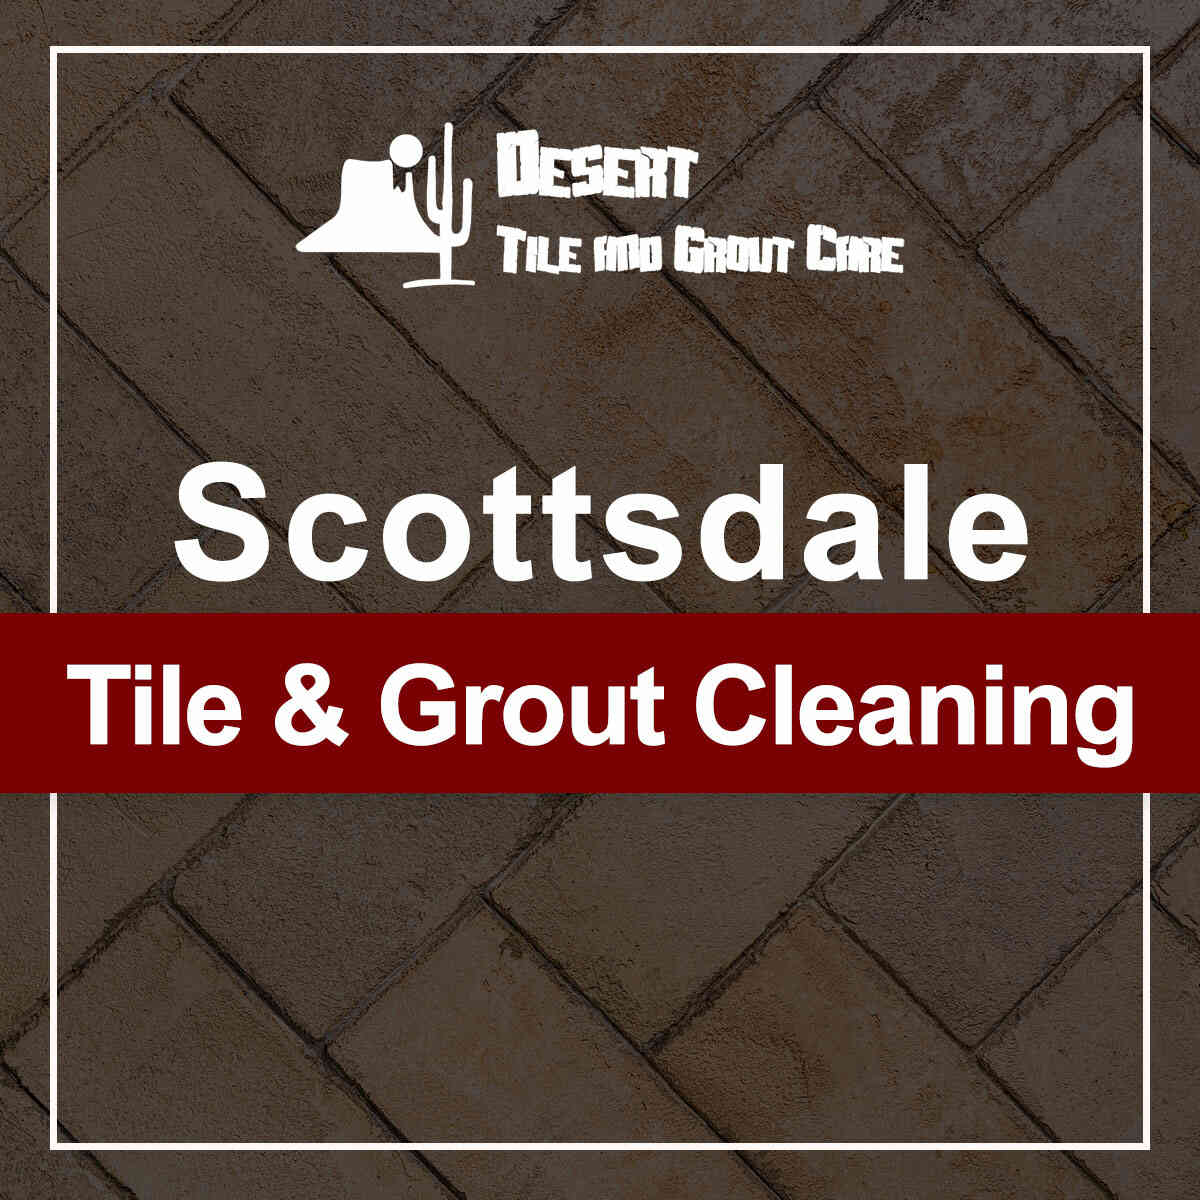 Our Professional Tile and Grout Cleaners Restored the Condition of